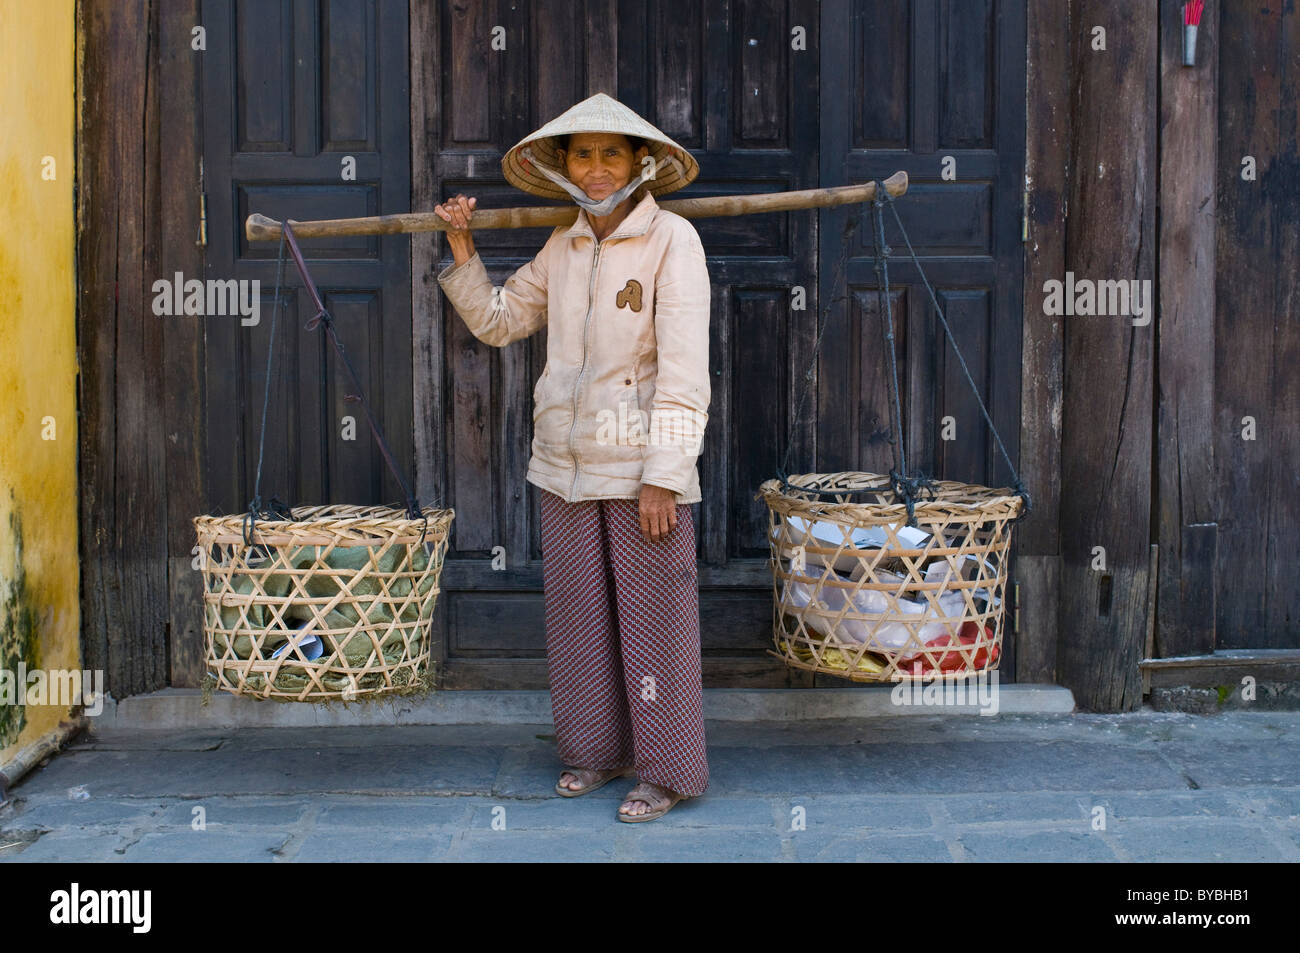 Man is carrying commodity, Hoi An, Vietnam, Asia Stock Photo